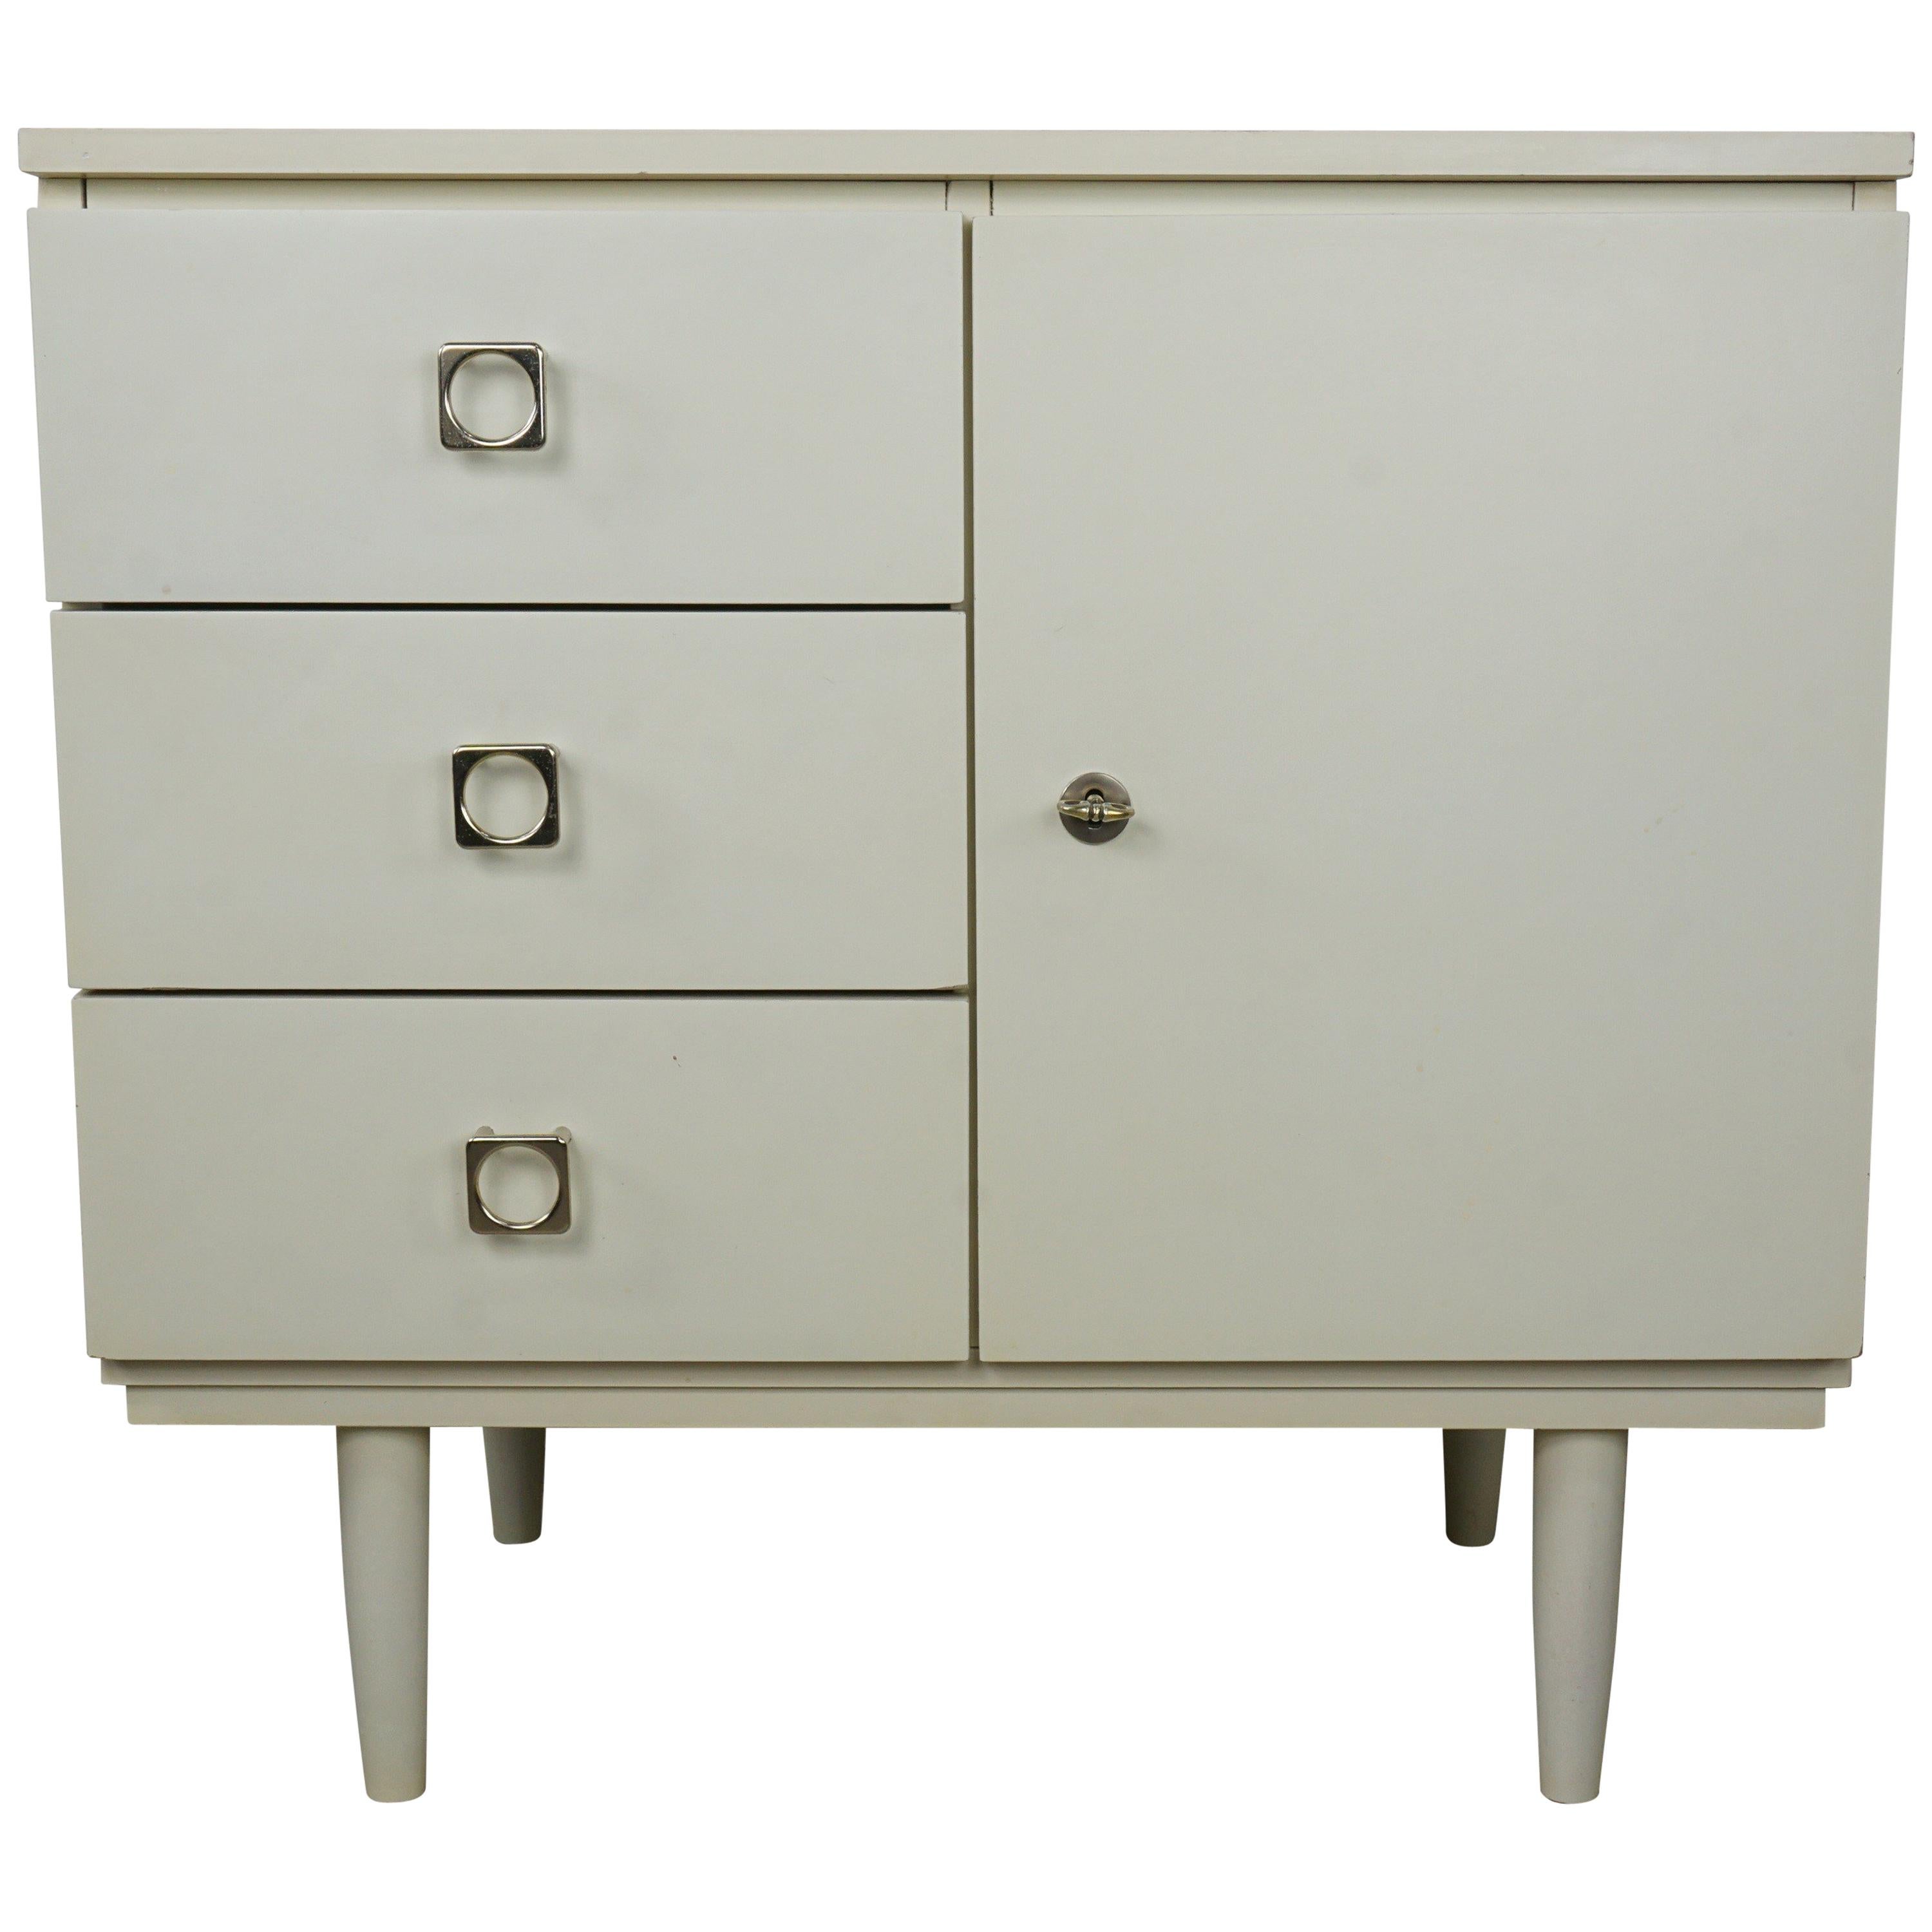 1950s-1960s White Satin Lacquered Wooden Cabinet